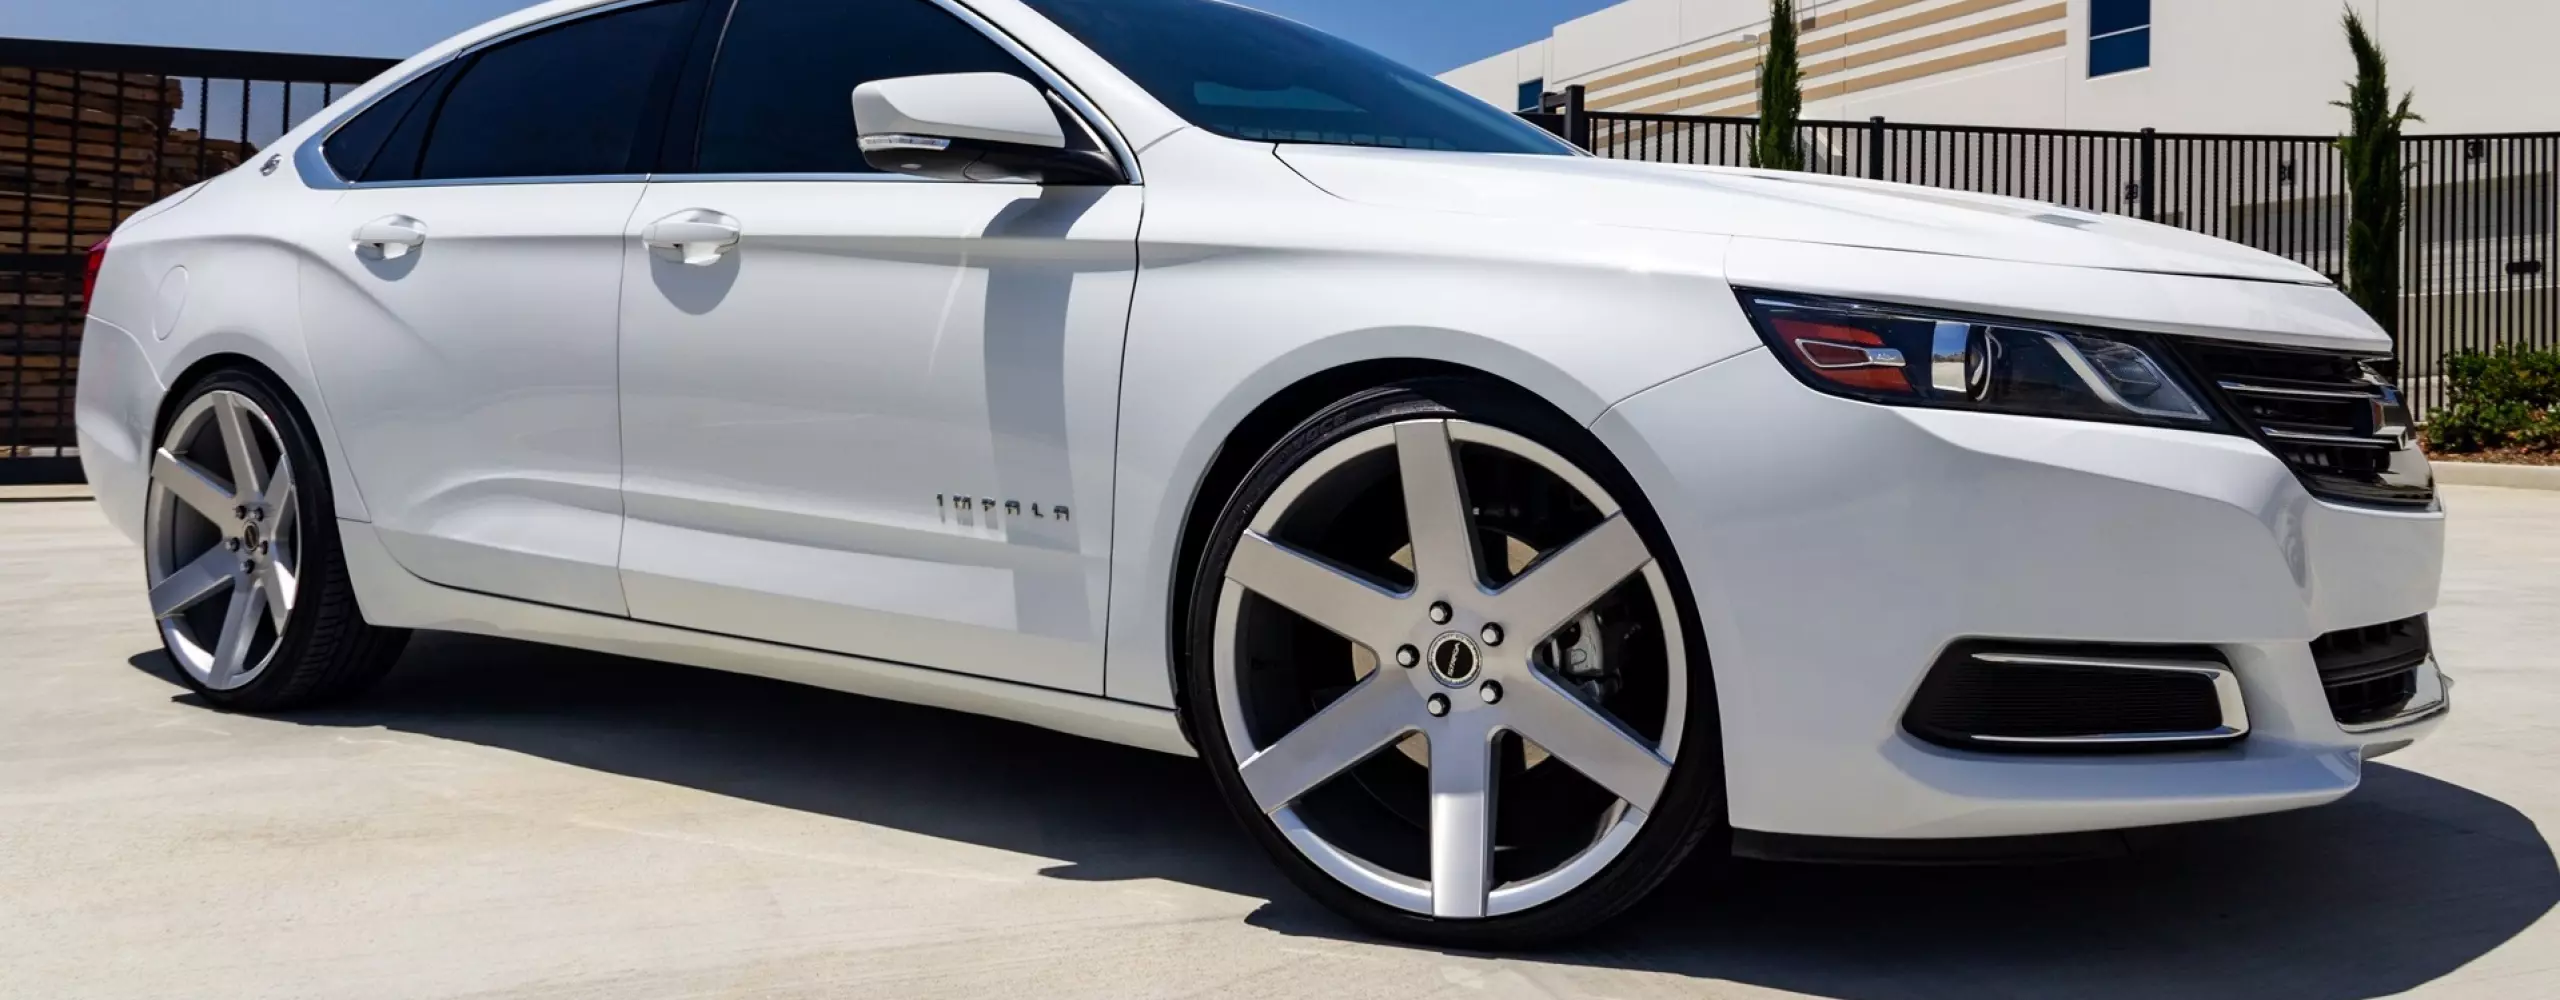 image of cars with new rims in a rotating banner on the homepage